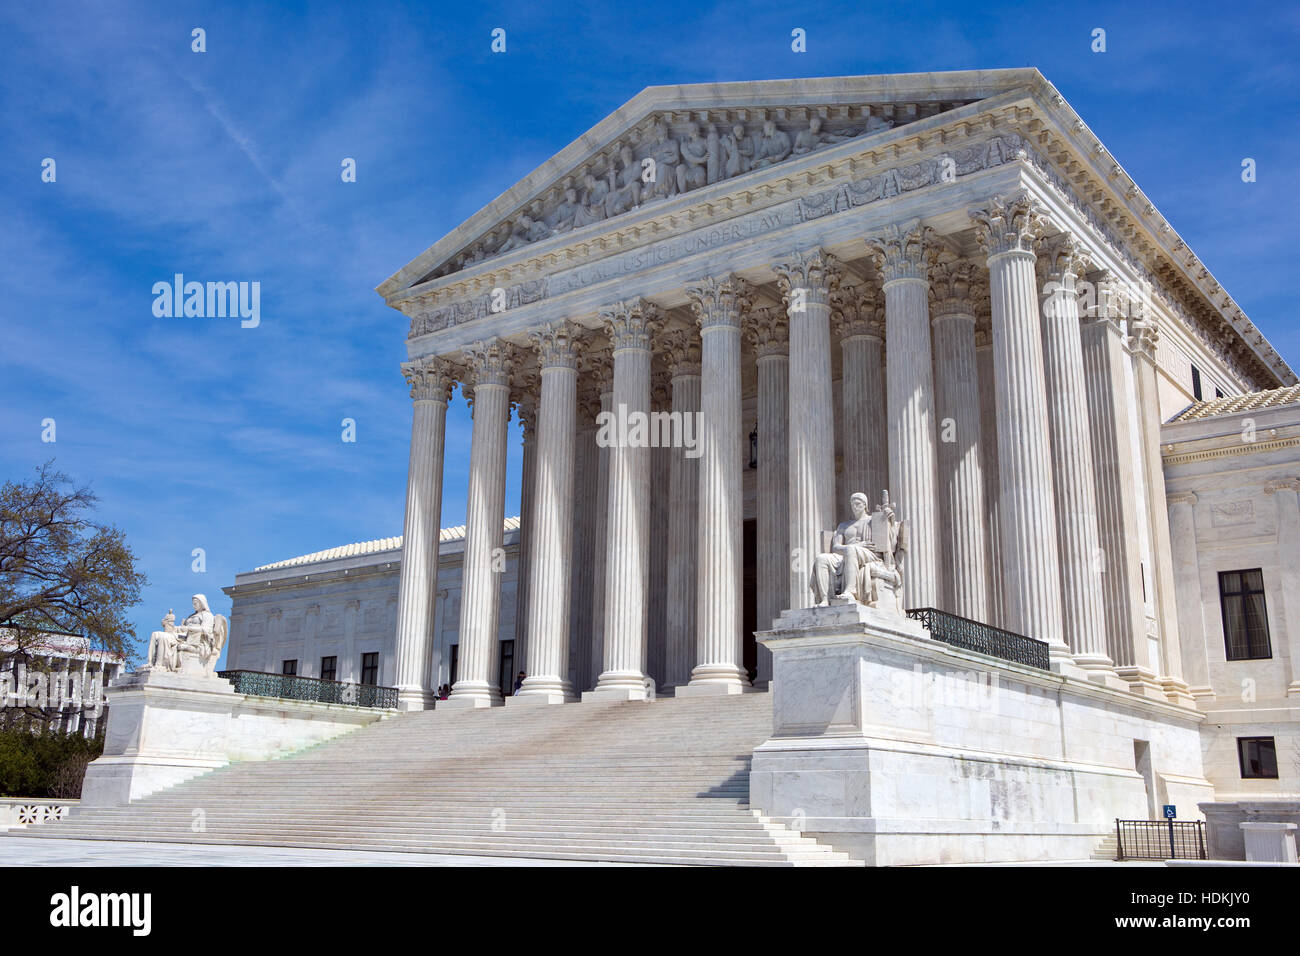 United States Supreme Court building is located in Washington, D.C., USA. Stock Photo